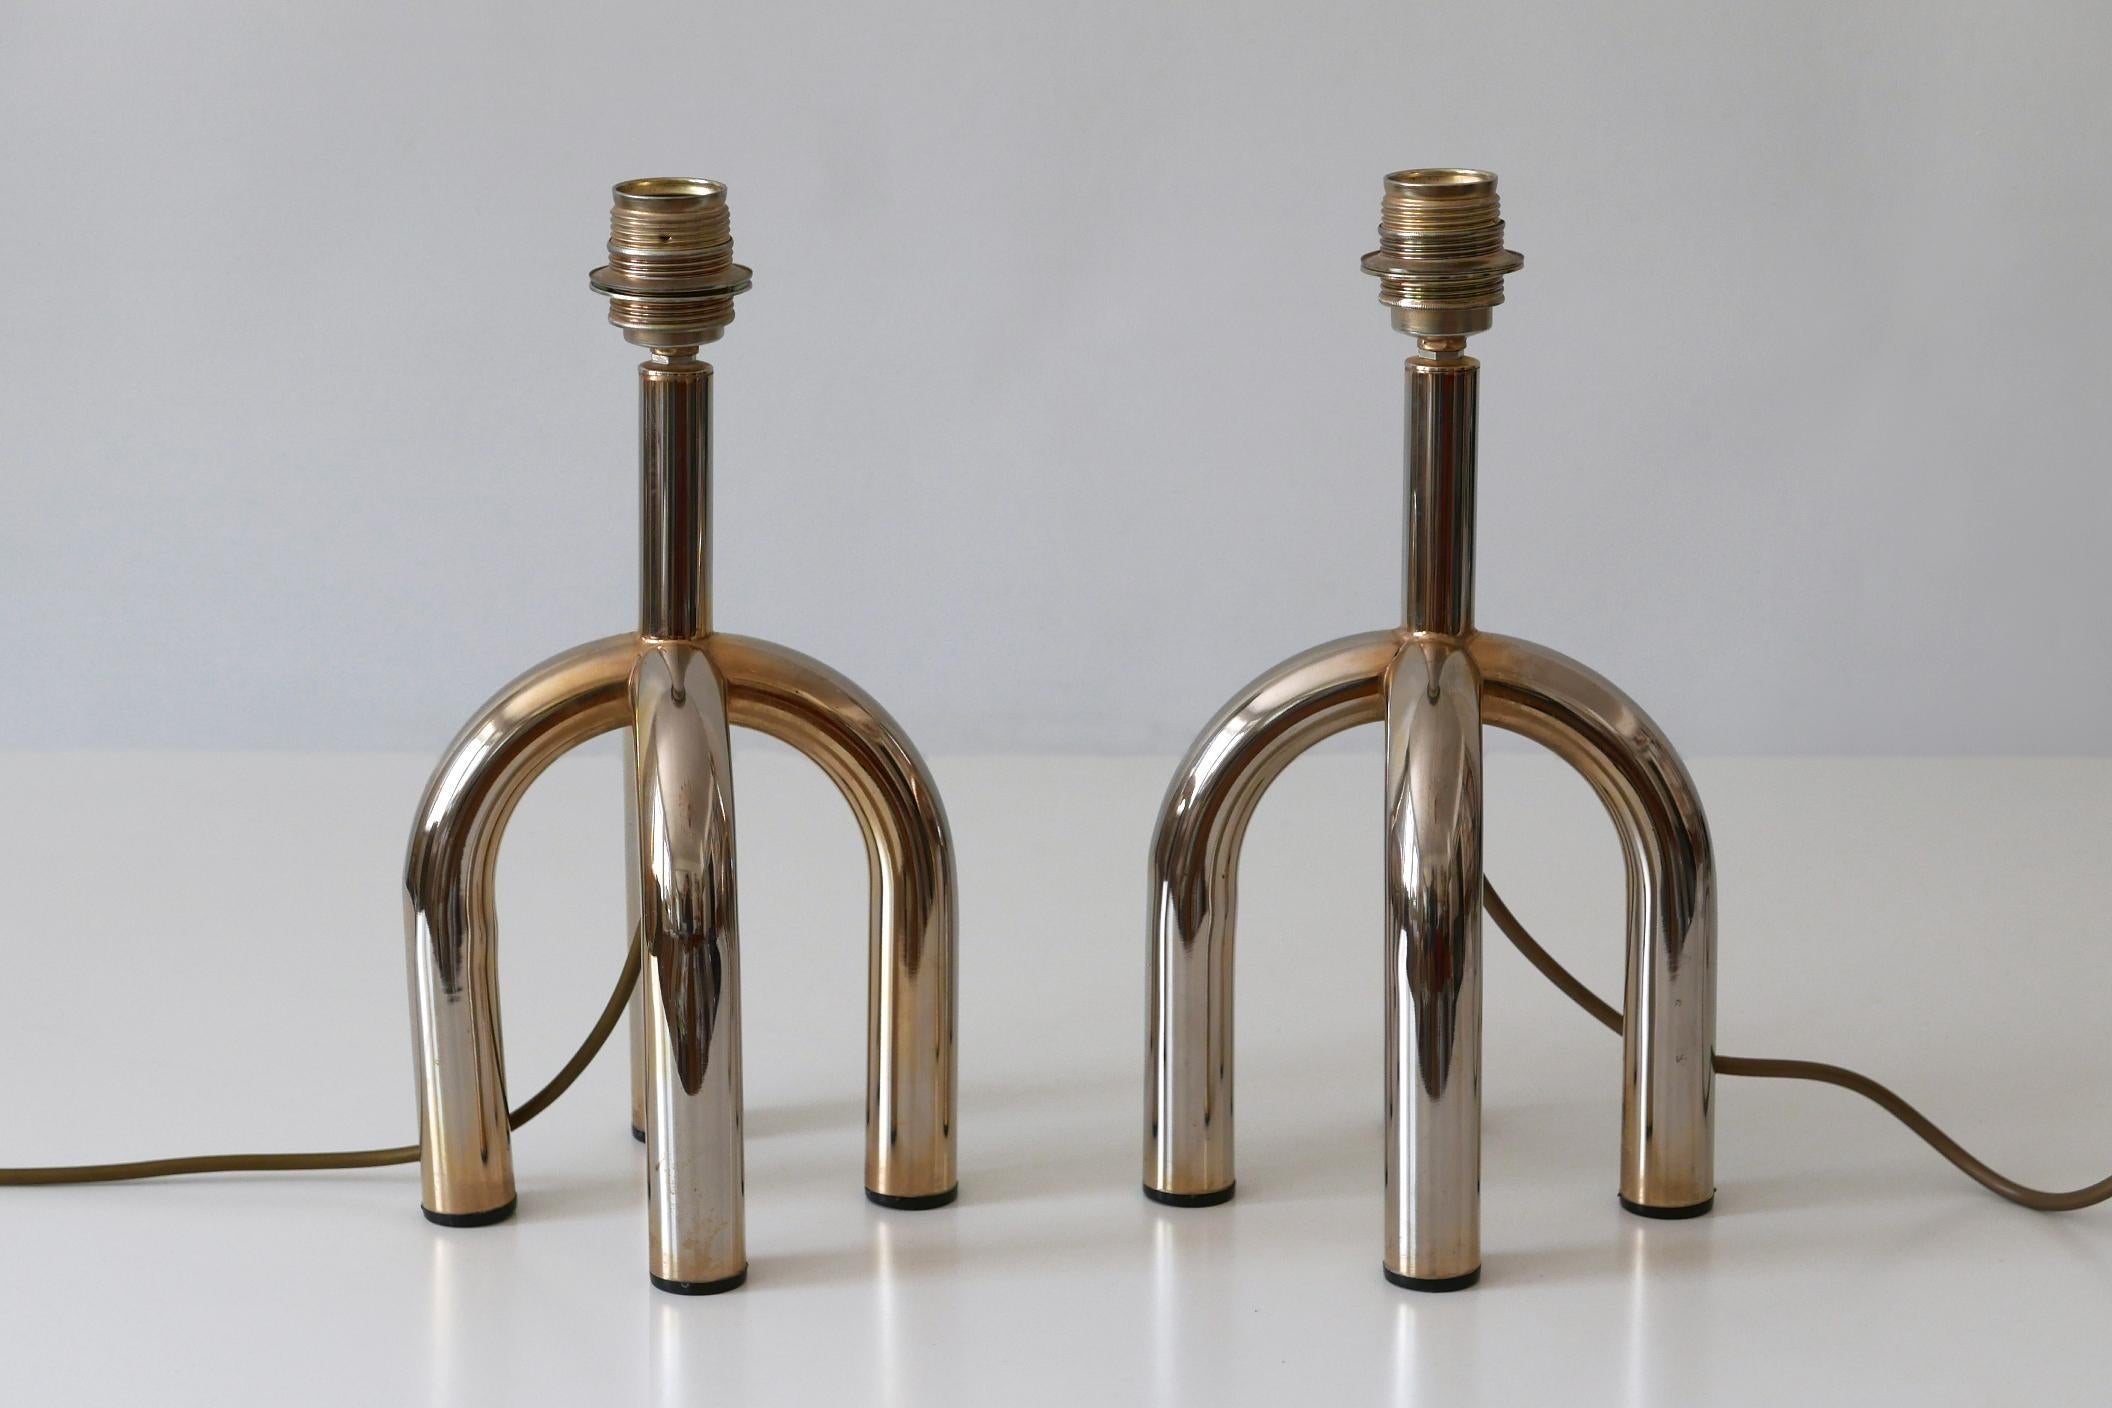 Set of two rare and beautiful Mid-Century Modern four-legged table lamps. Manufactured in Germany, 1970s.

Executed in nickel-plated metal, each lamp comes with 1 x E27 / E26 Edison screw fit bulb holder, is wired, in working condition and runs both